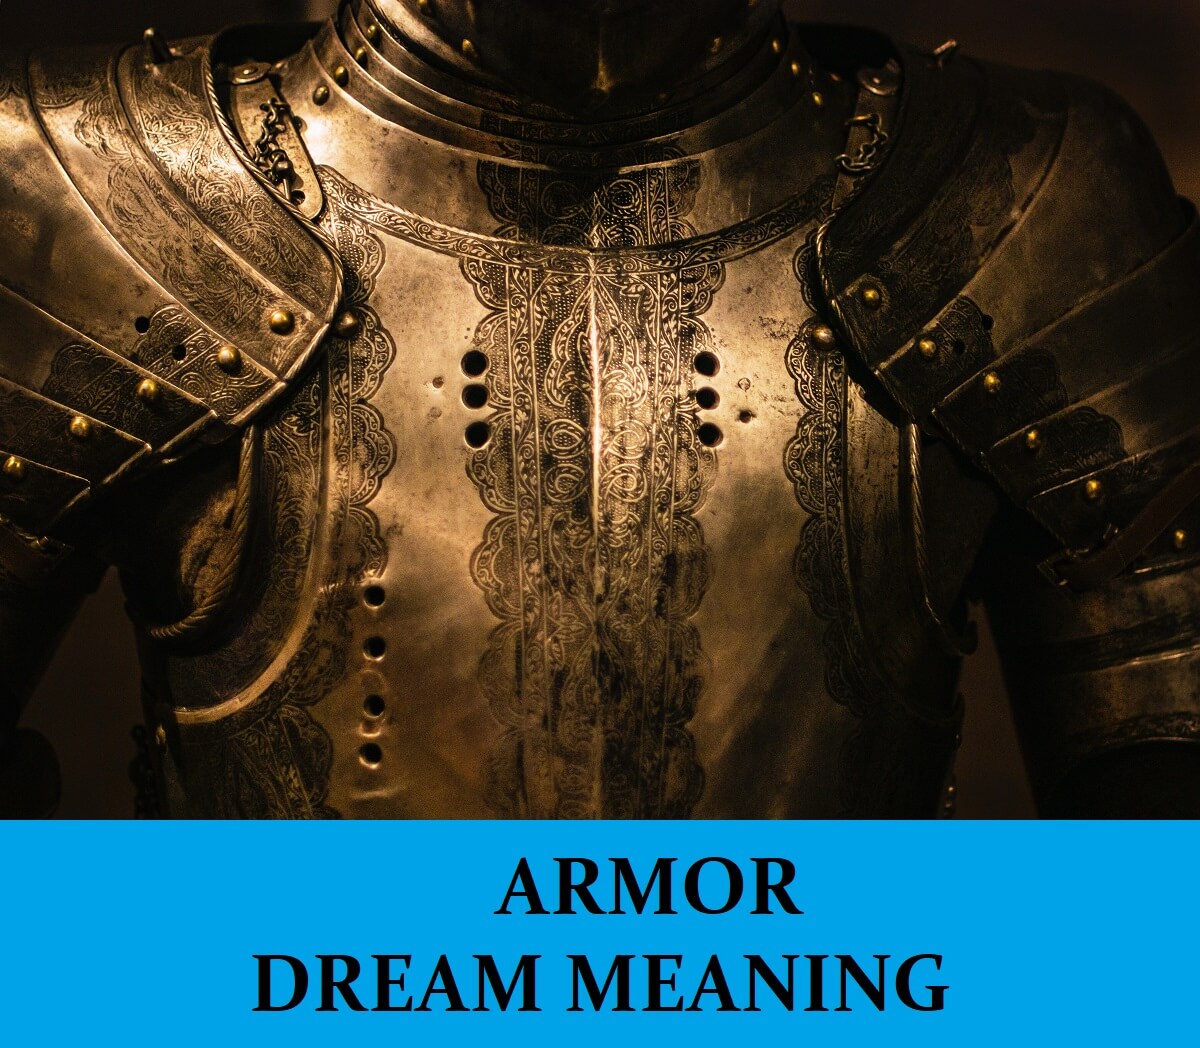 Dream About Armors